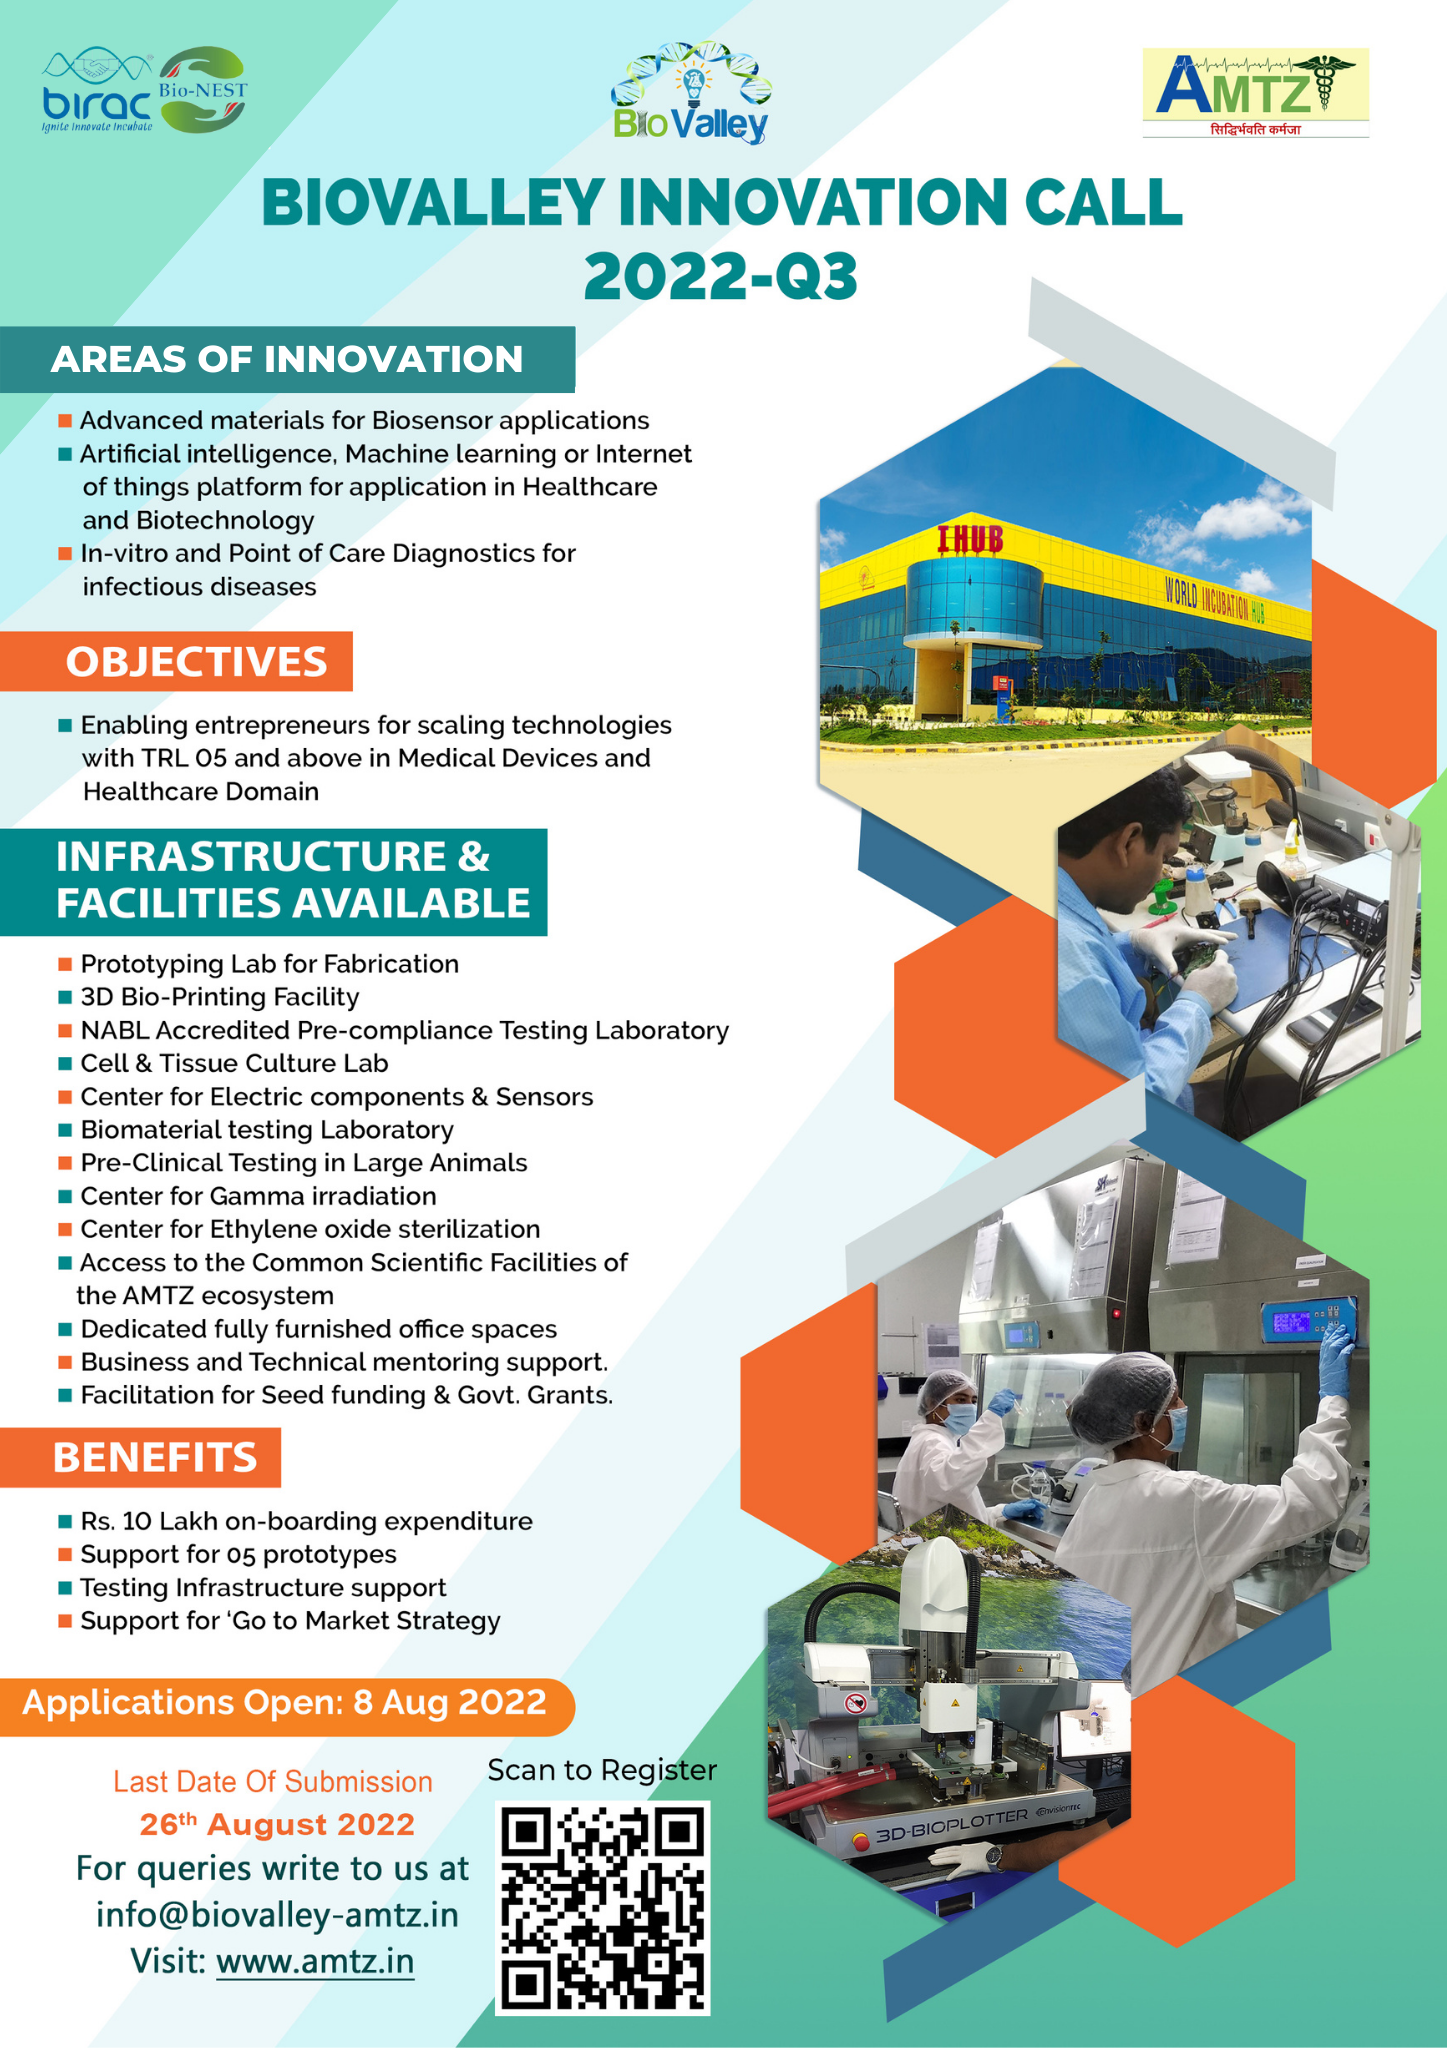 Biovalley Innovation Call 2022 for Biosensor Applications, Artificial Intelligence and Machine learning in health care Medtech and Biotechnology